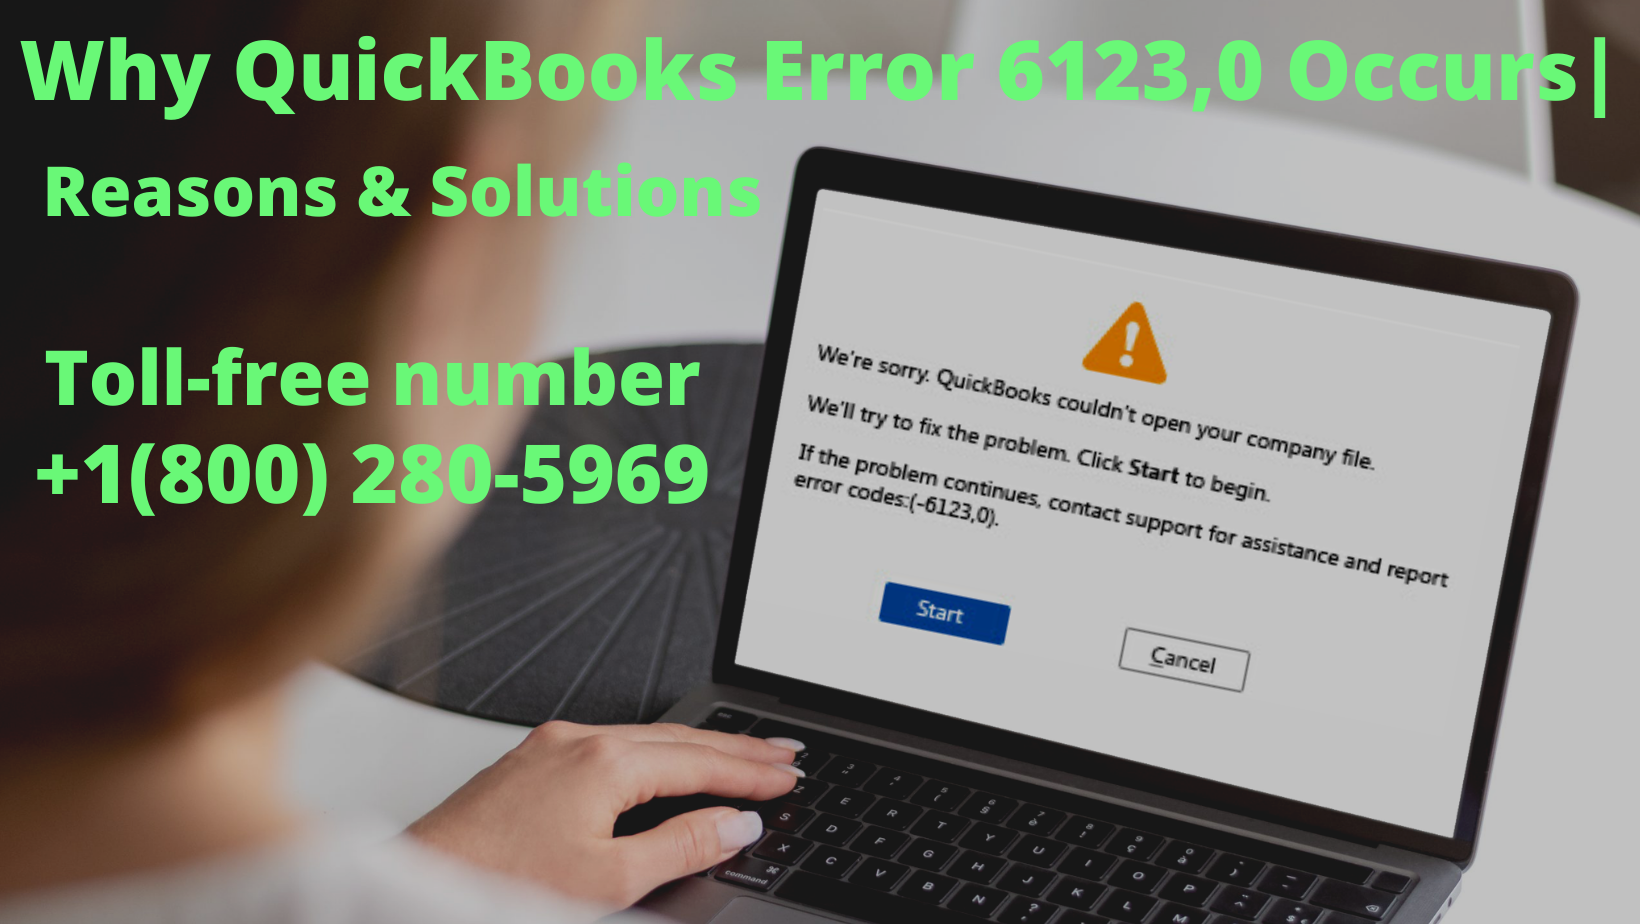 In this blog, we have discussed all the possible points that can be the reason for QuickBooks Error 6123